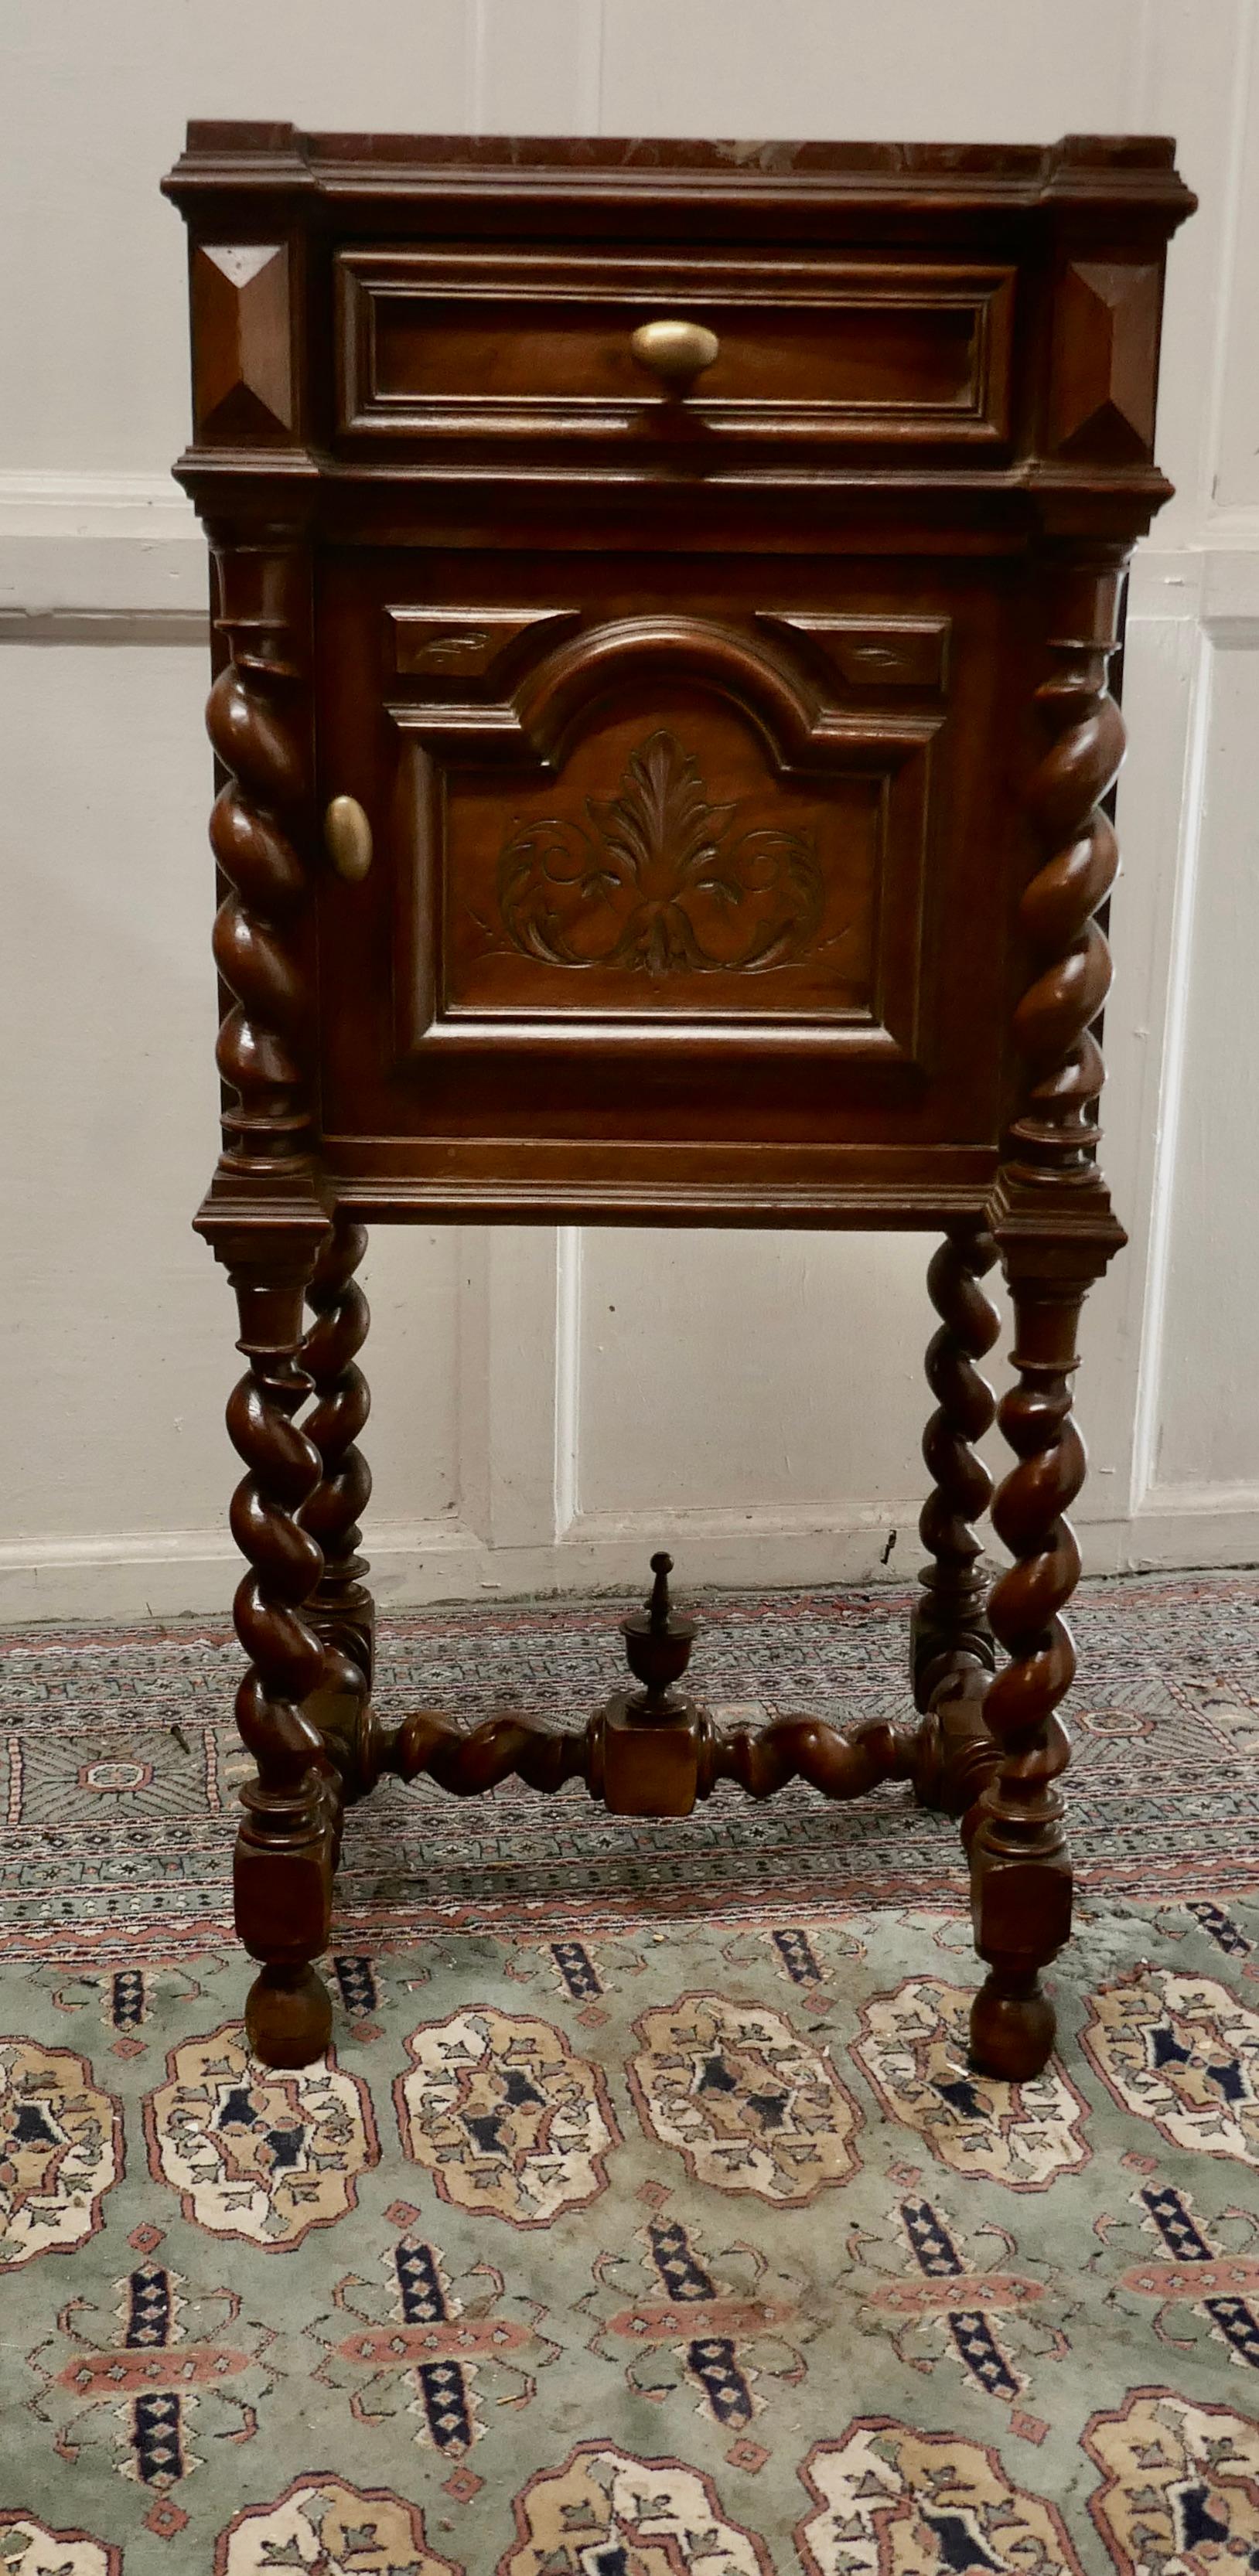 French walnut Barleytwist night table or side cupboard

This is a very attractive piece of furniture from Brittany, the cabinet has a small drawer at the top with a cupboard beneath and it has attractive Barley twist turnings on the front and